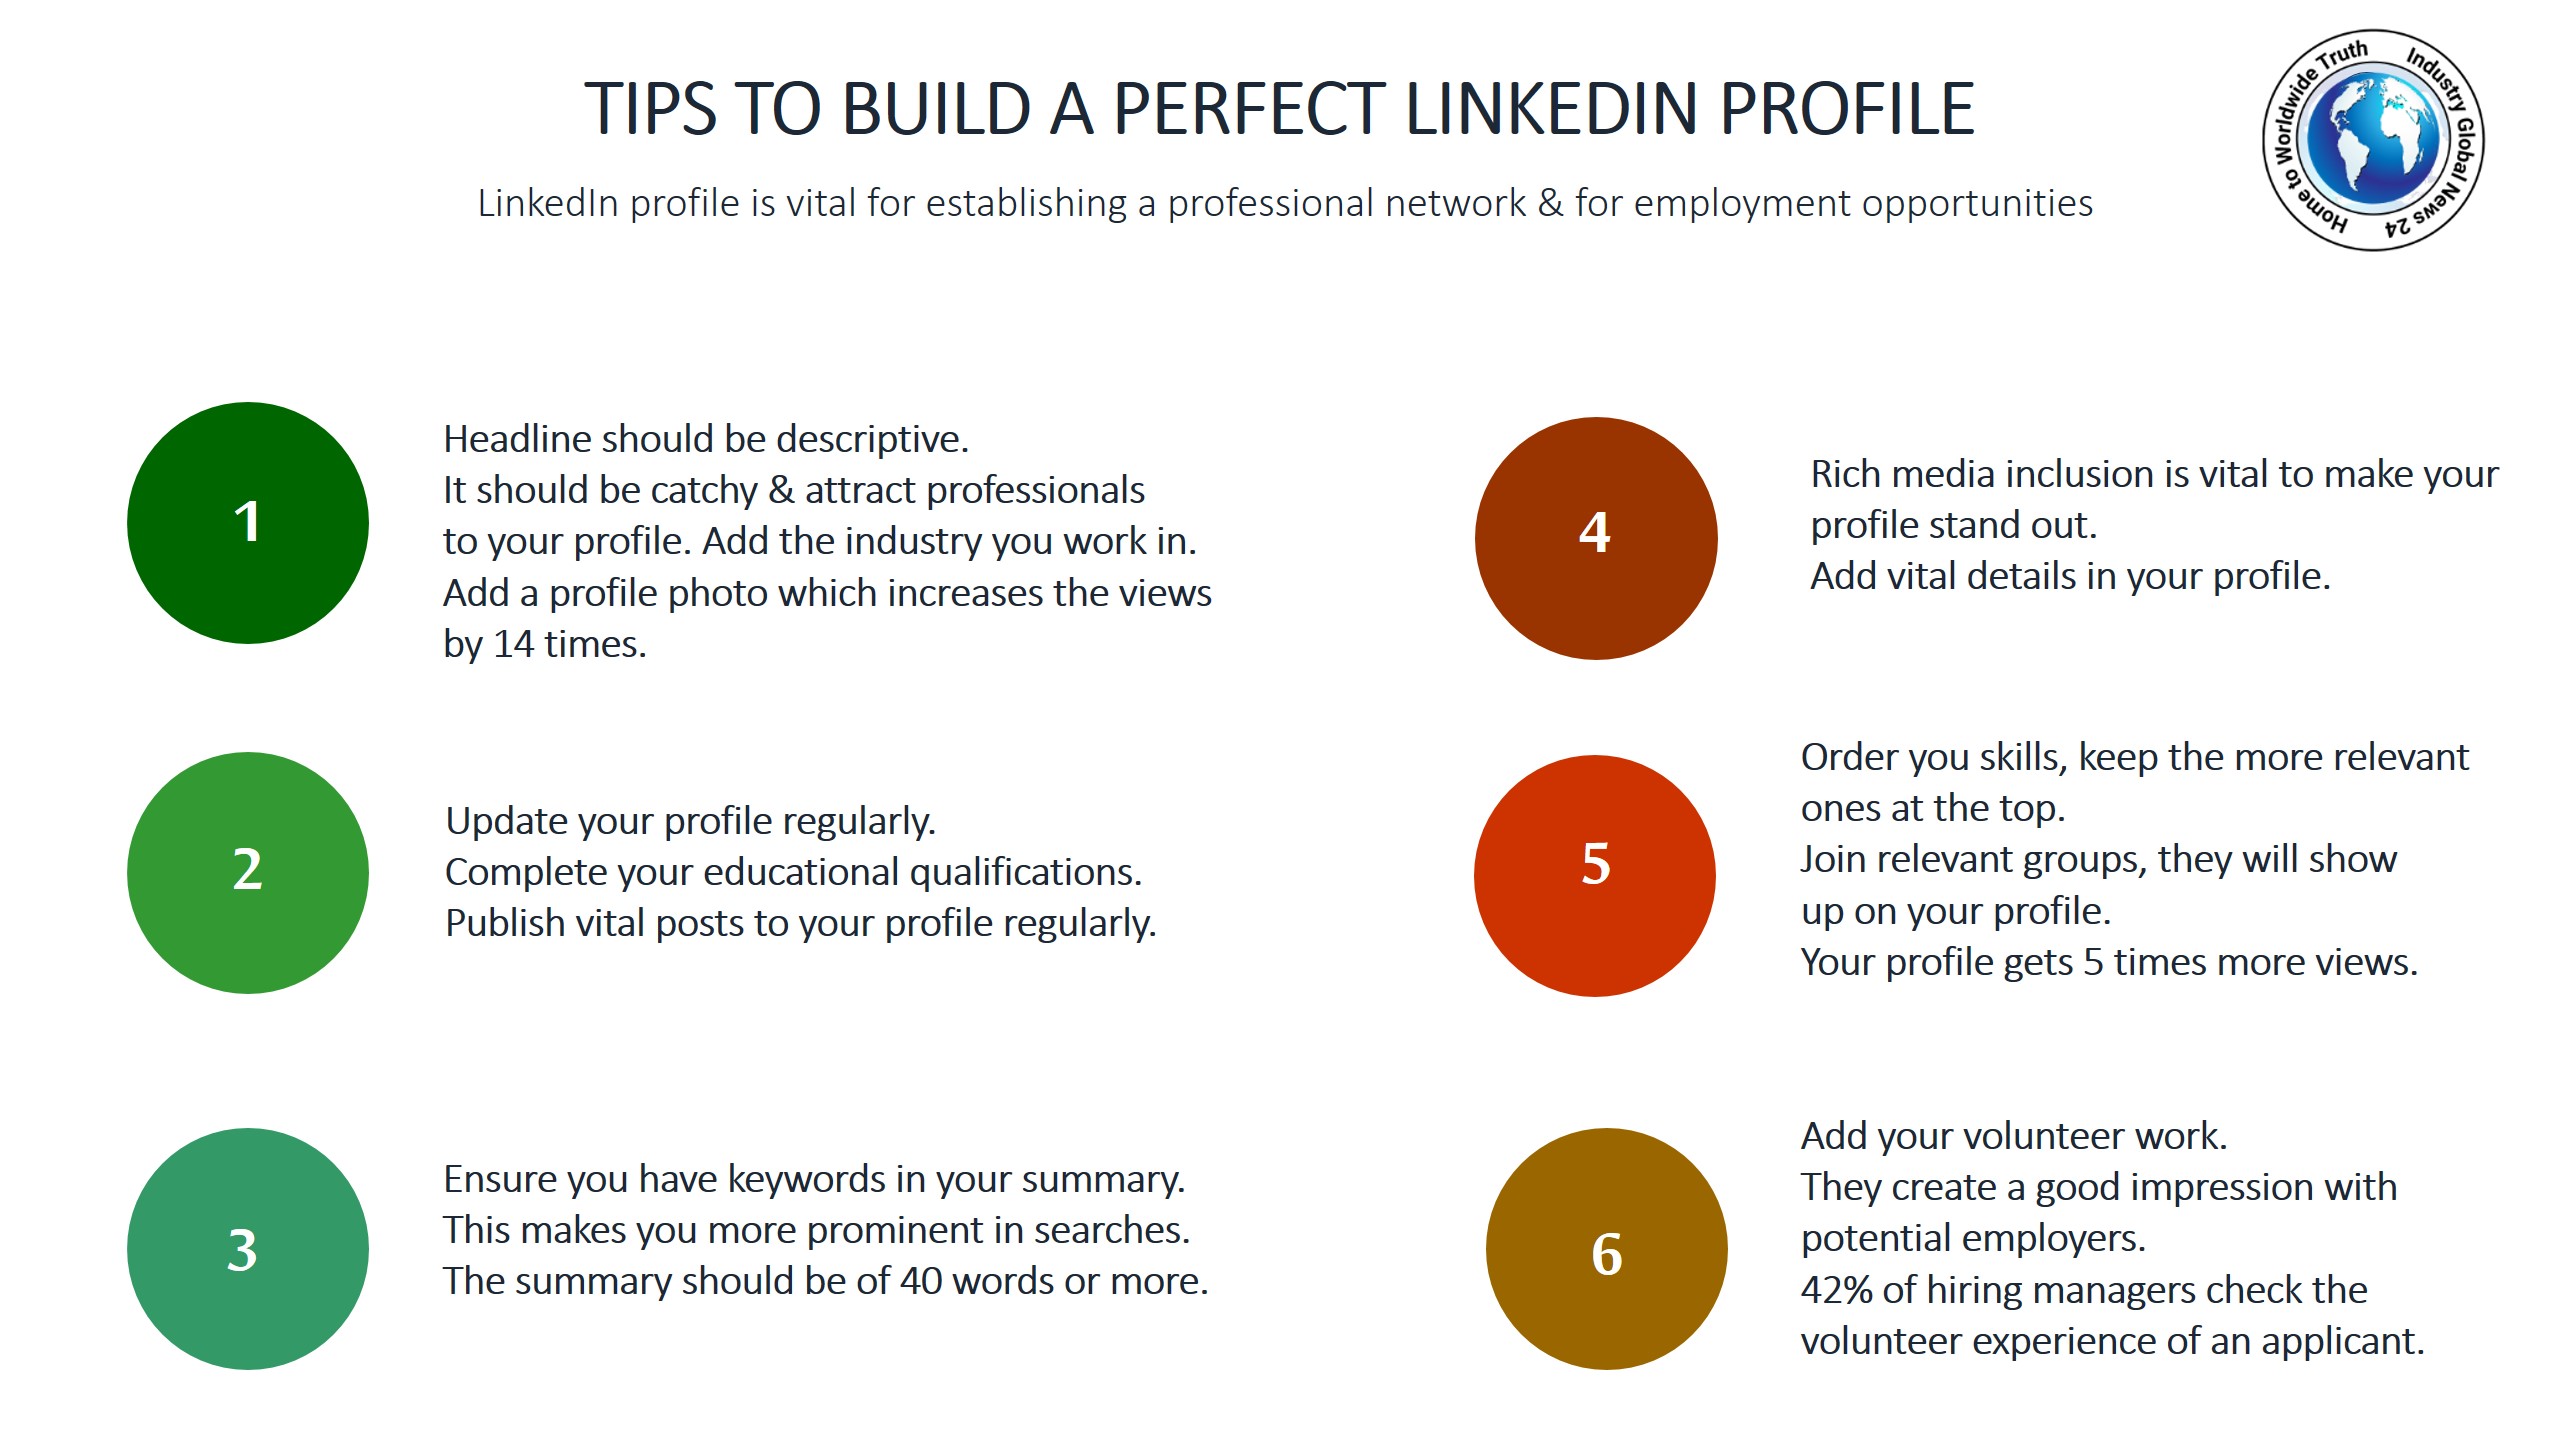 Tips to build a perfect LinkedIn profile